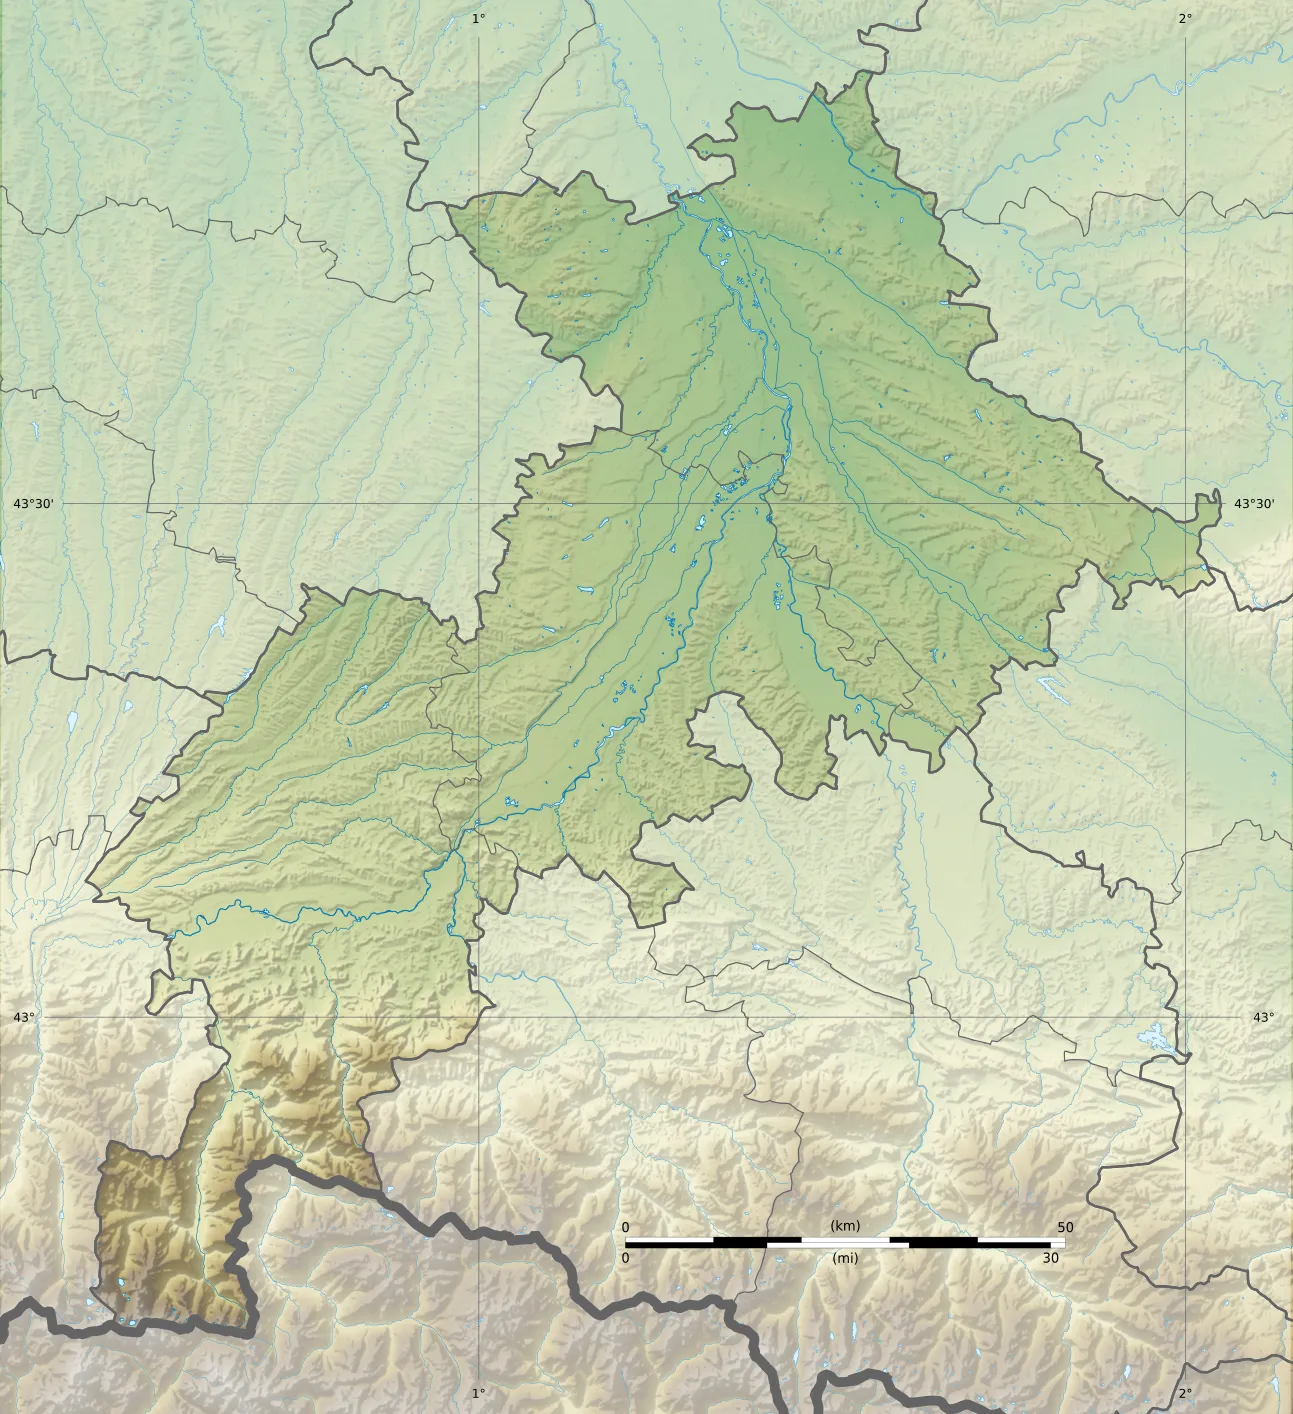 Photo showing: Blank physical map of the department of Haute-Garonne, France, for geo-location purpose.